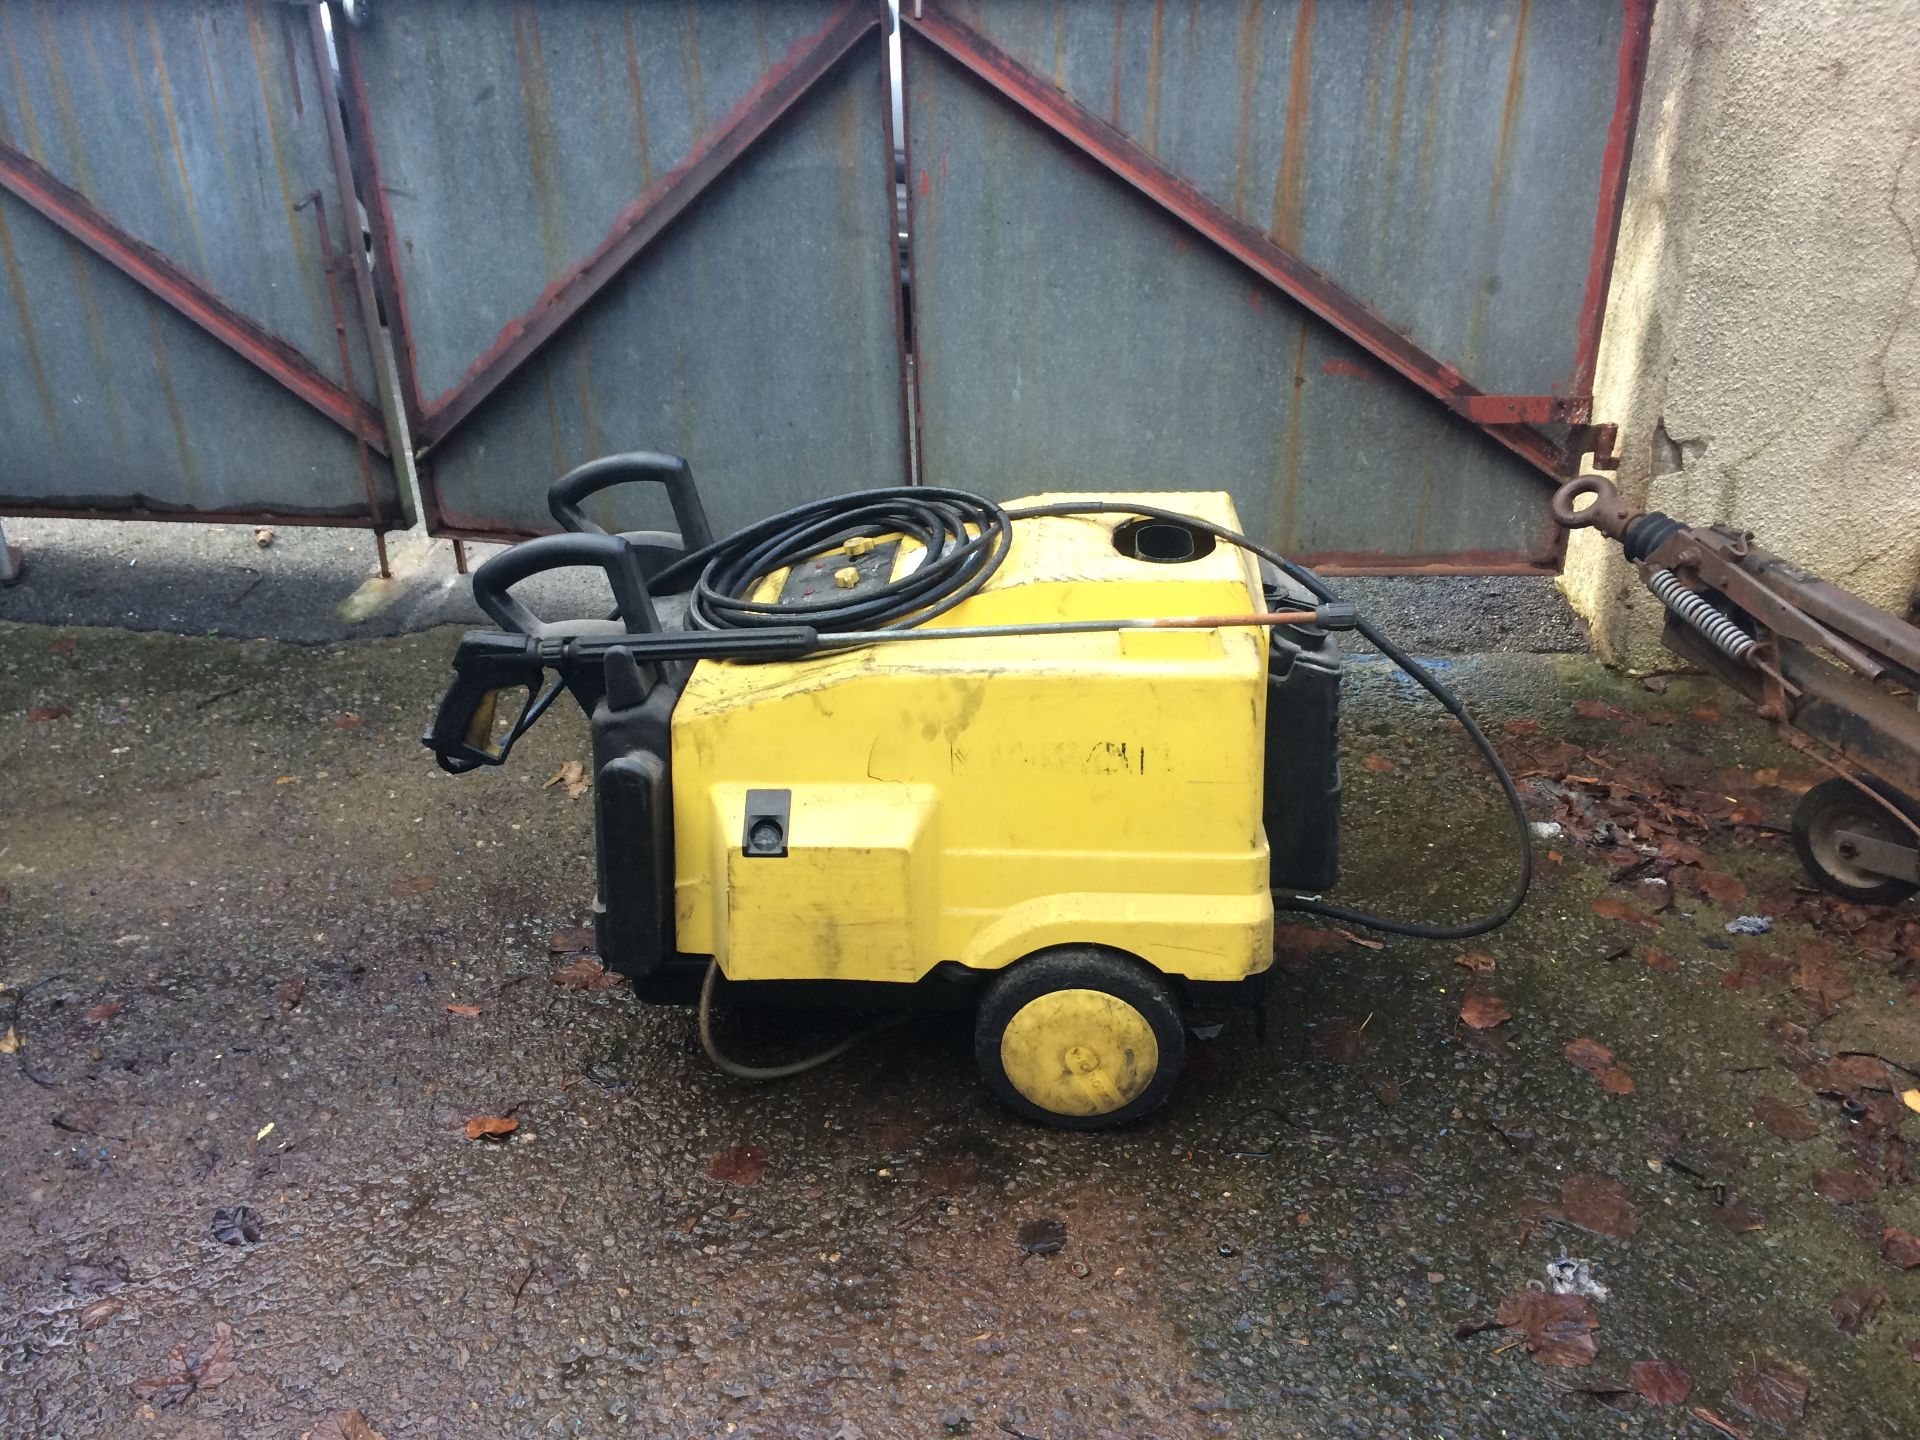 * Karcher 790 Pressure steam cleaner, video of machine in operation can be found on Youtube,